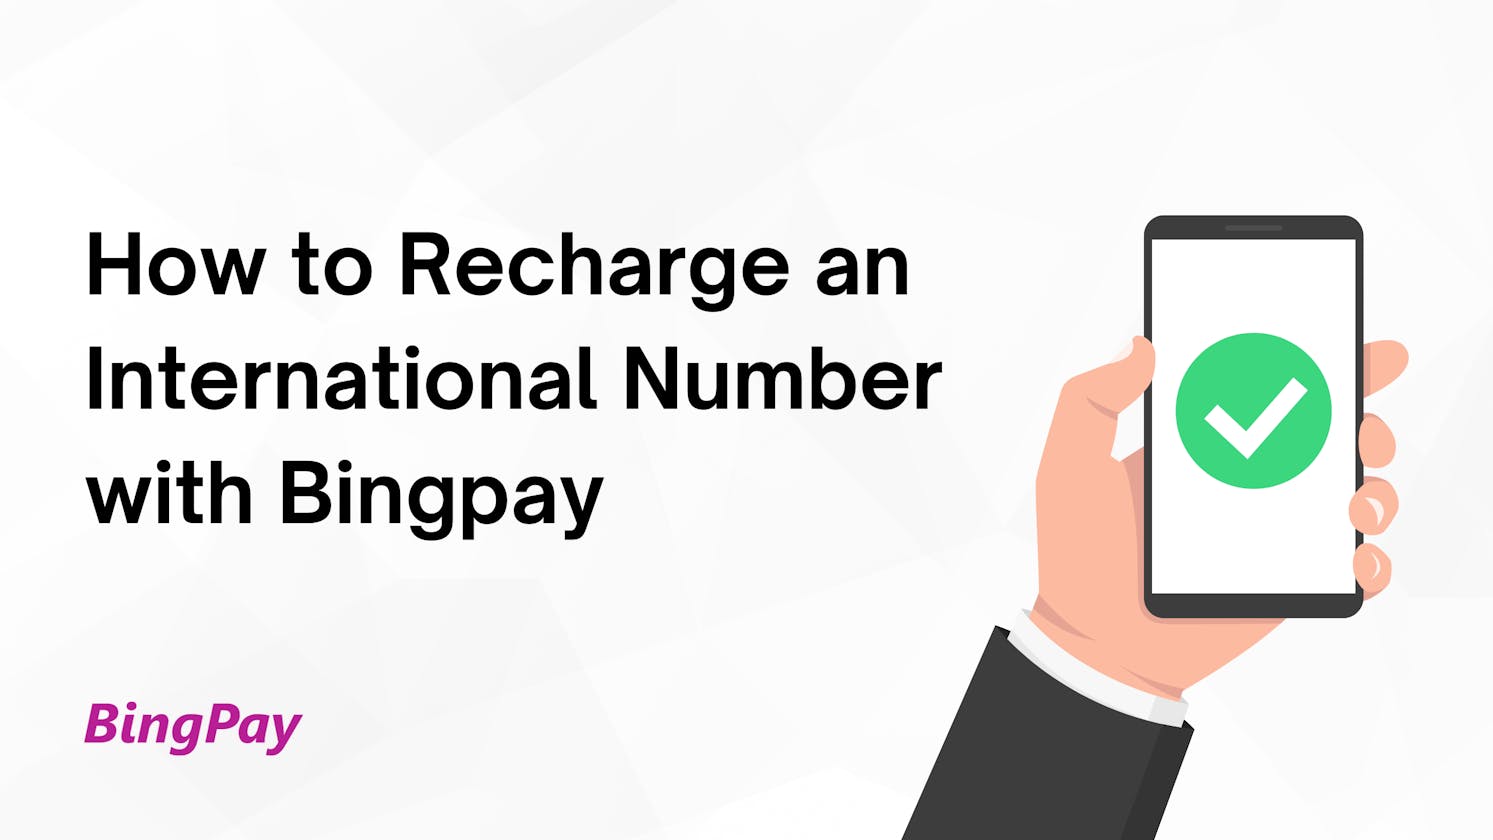 How to Recharge International Number with Bingpay